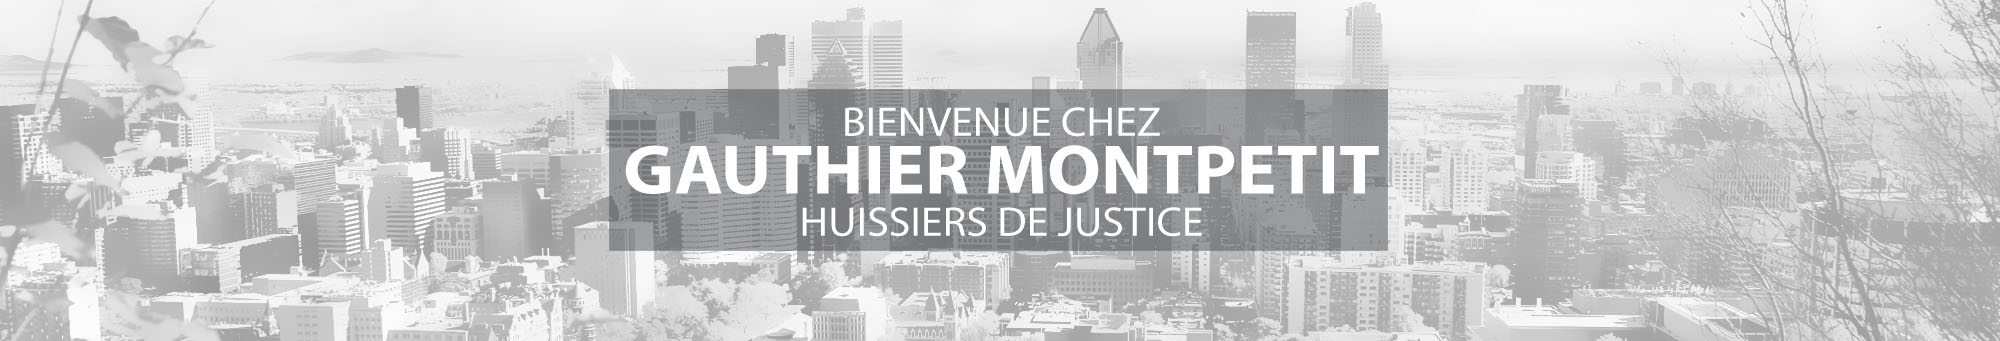 Gauthier Montpetit Huissiers